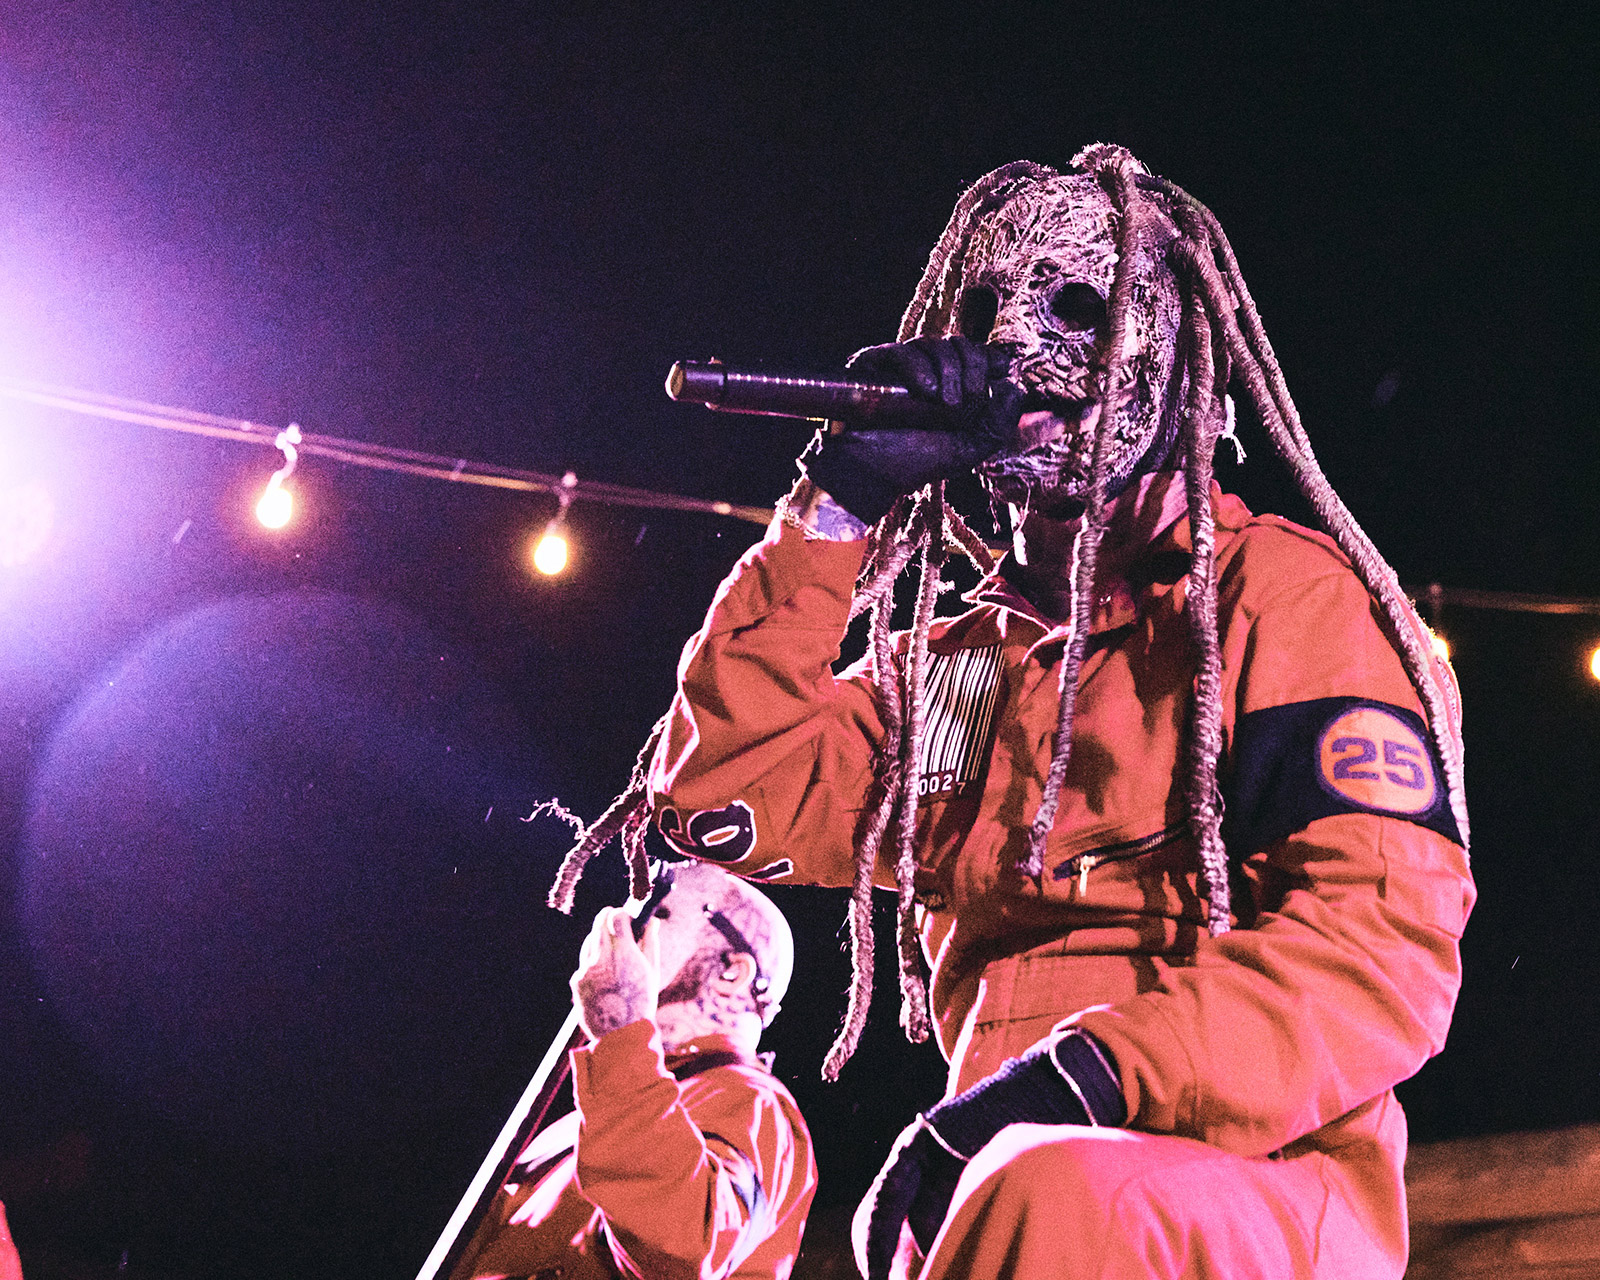 See photos of Slipknot’s surprise, intimate pre-Sick New World show